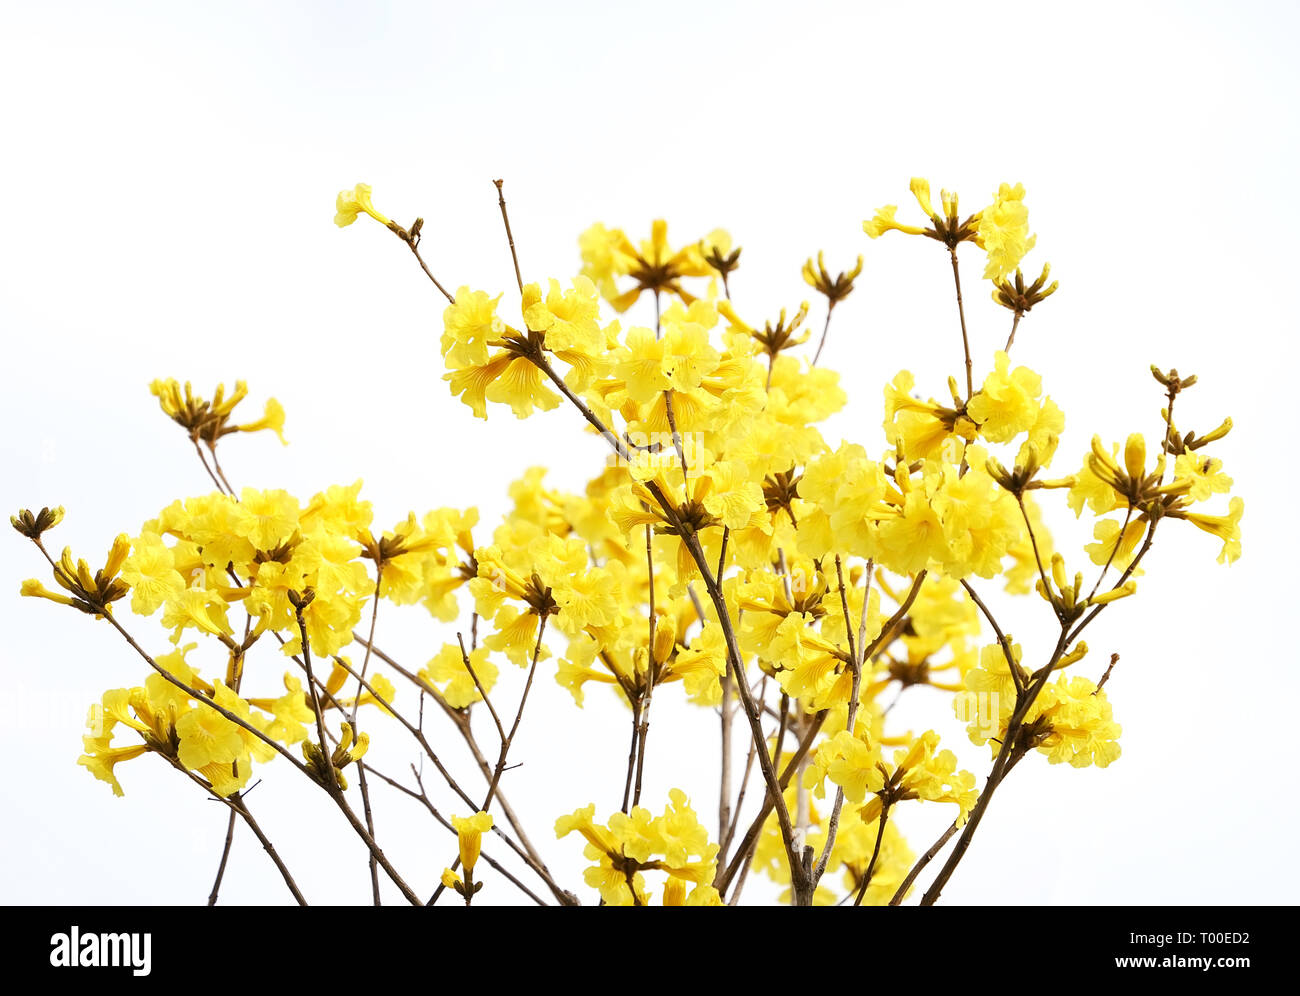 Tabebuia chrysotricha yellow flowers blossom in spring Stock Photo